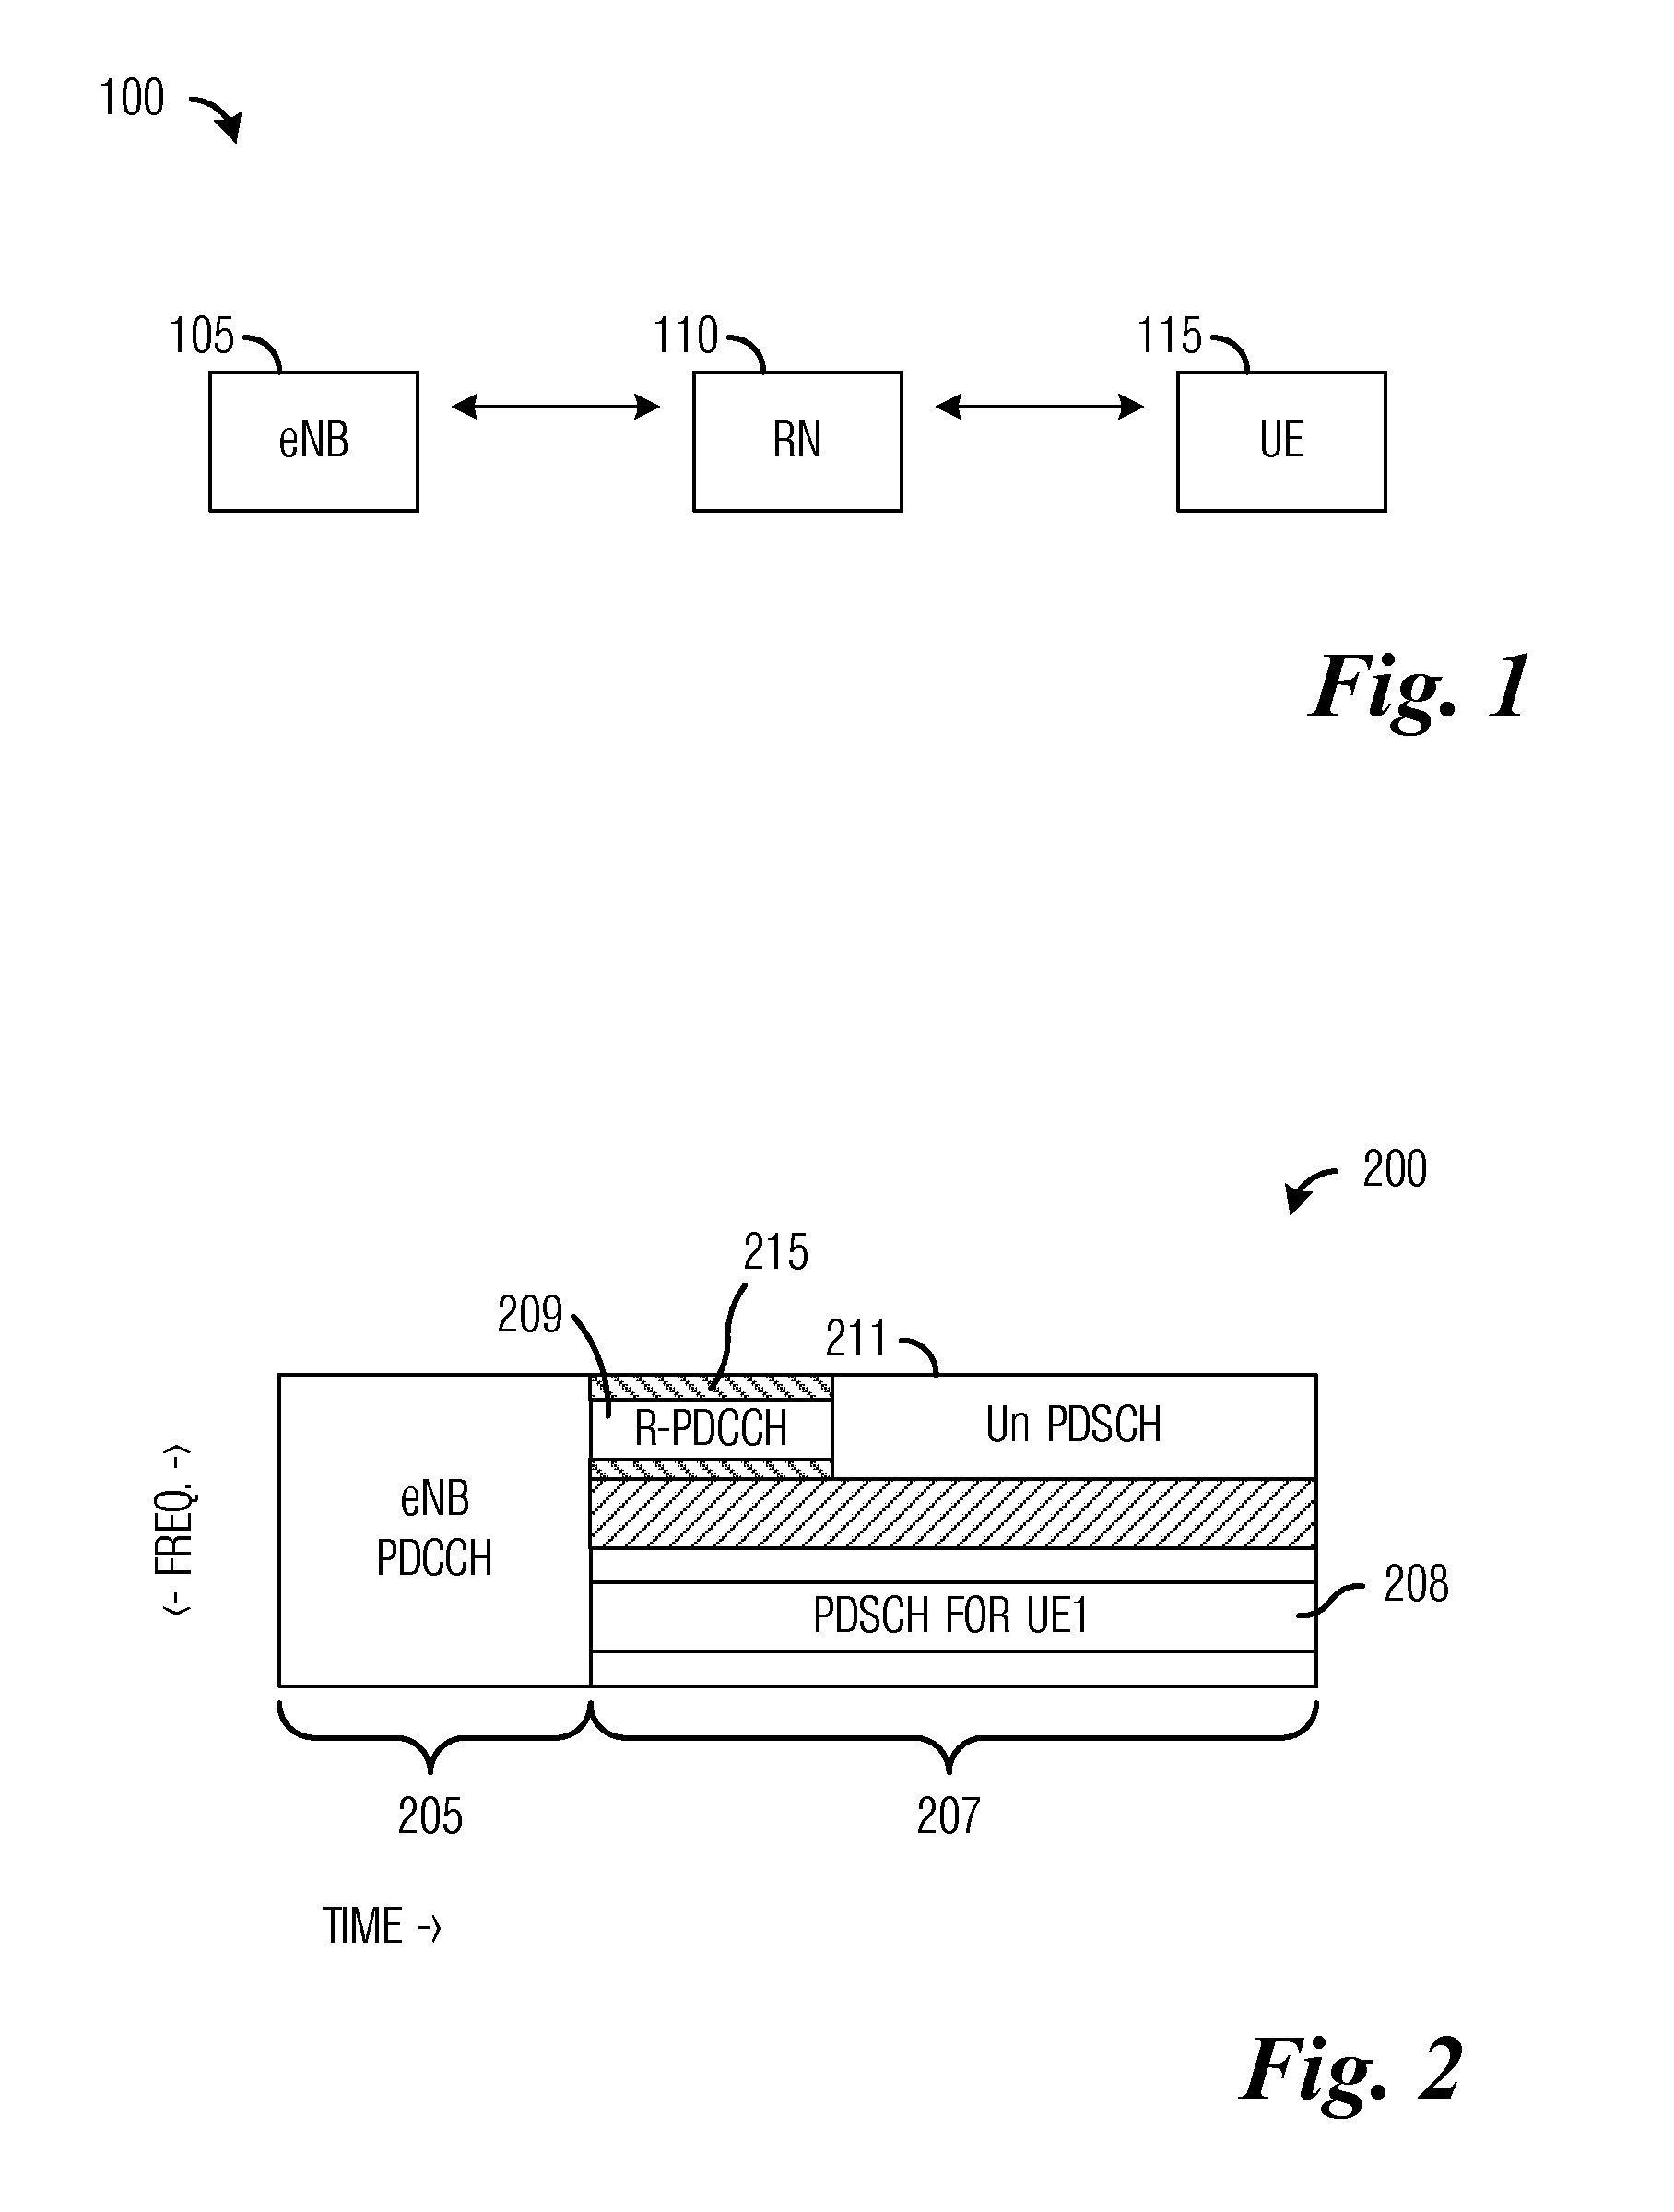 System and Method for Transmitting a Control Channel